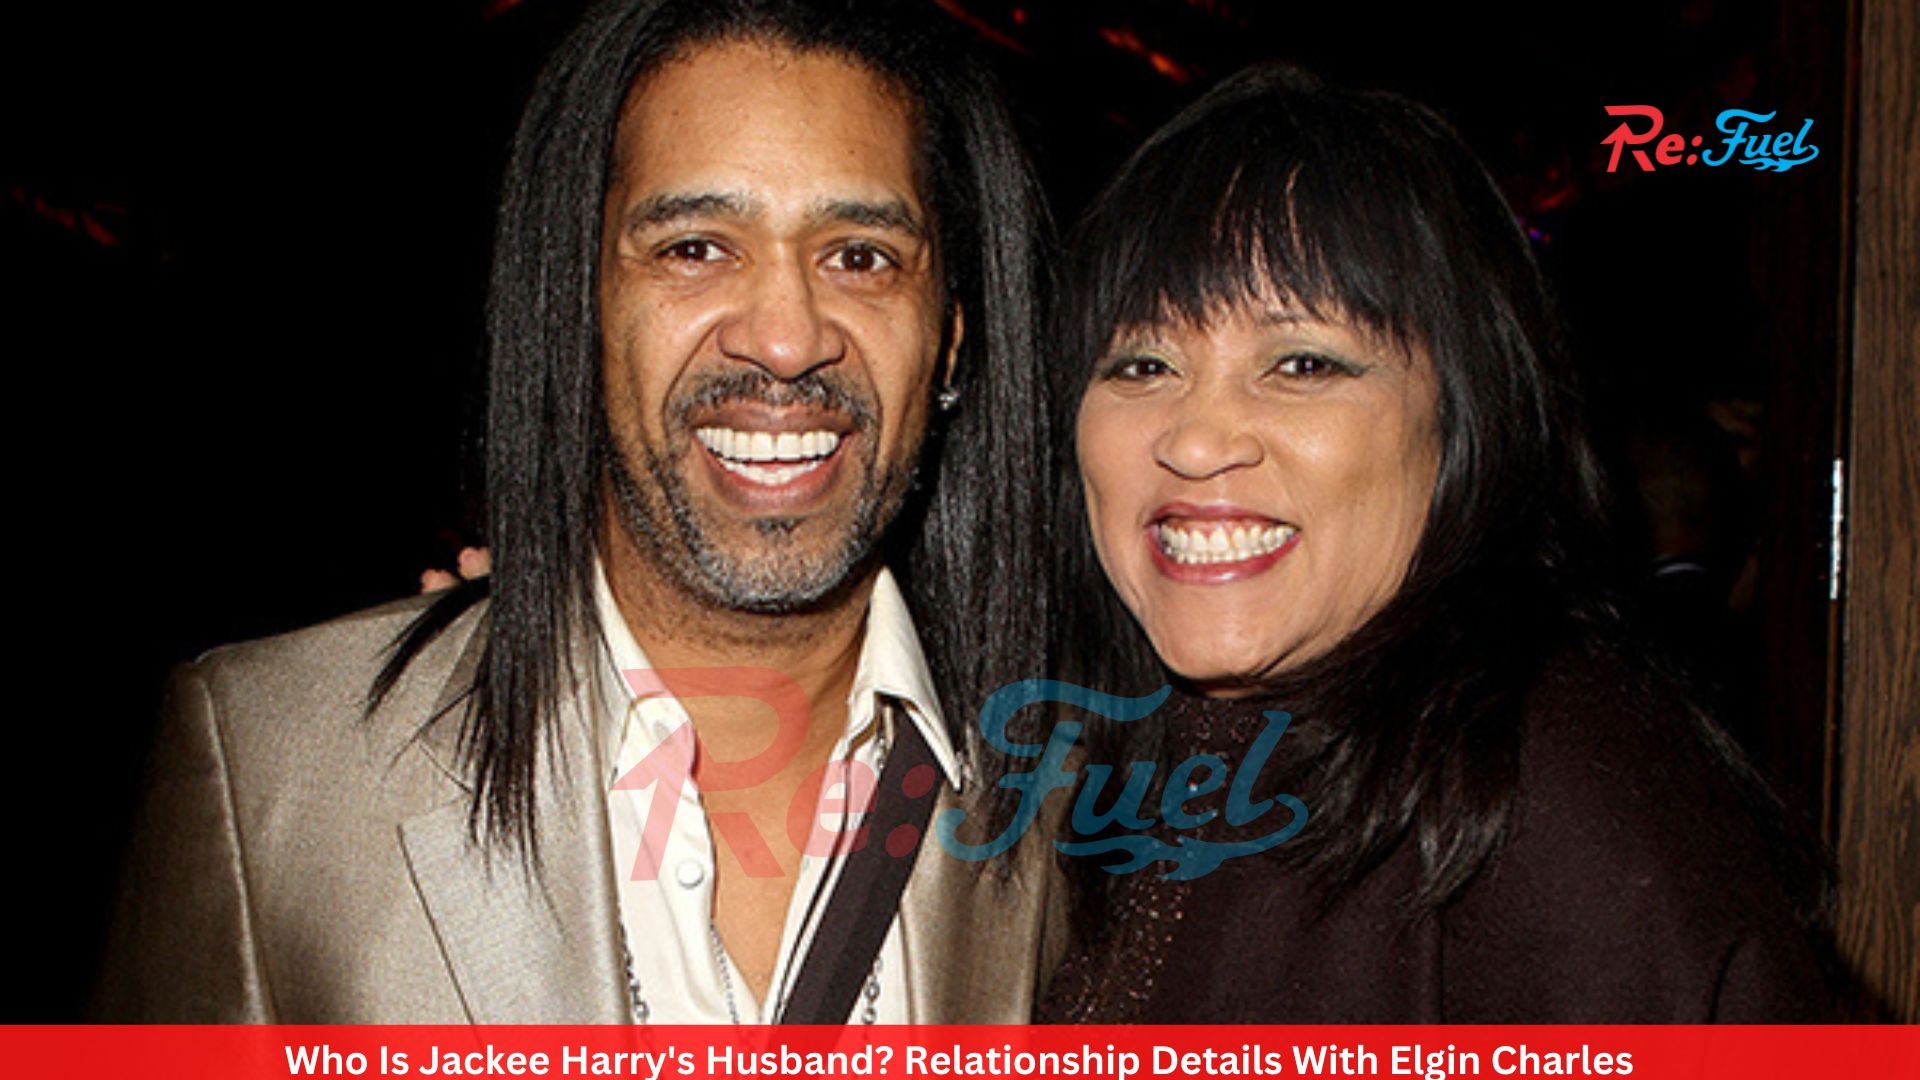 Who Is Jackee Harry's Husband? Relationship Details With Elgin Charles